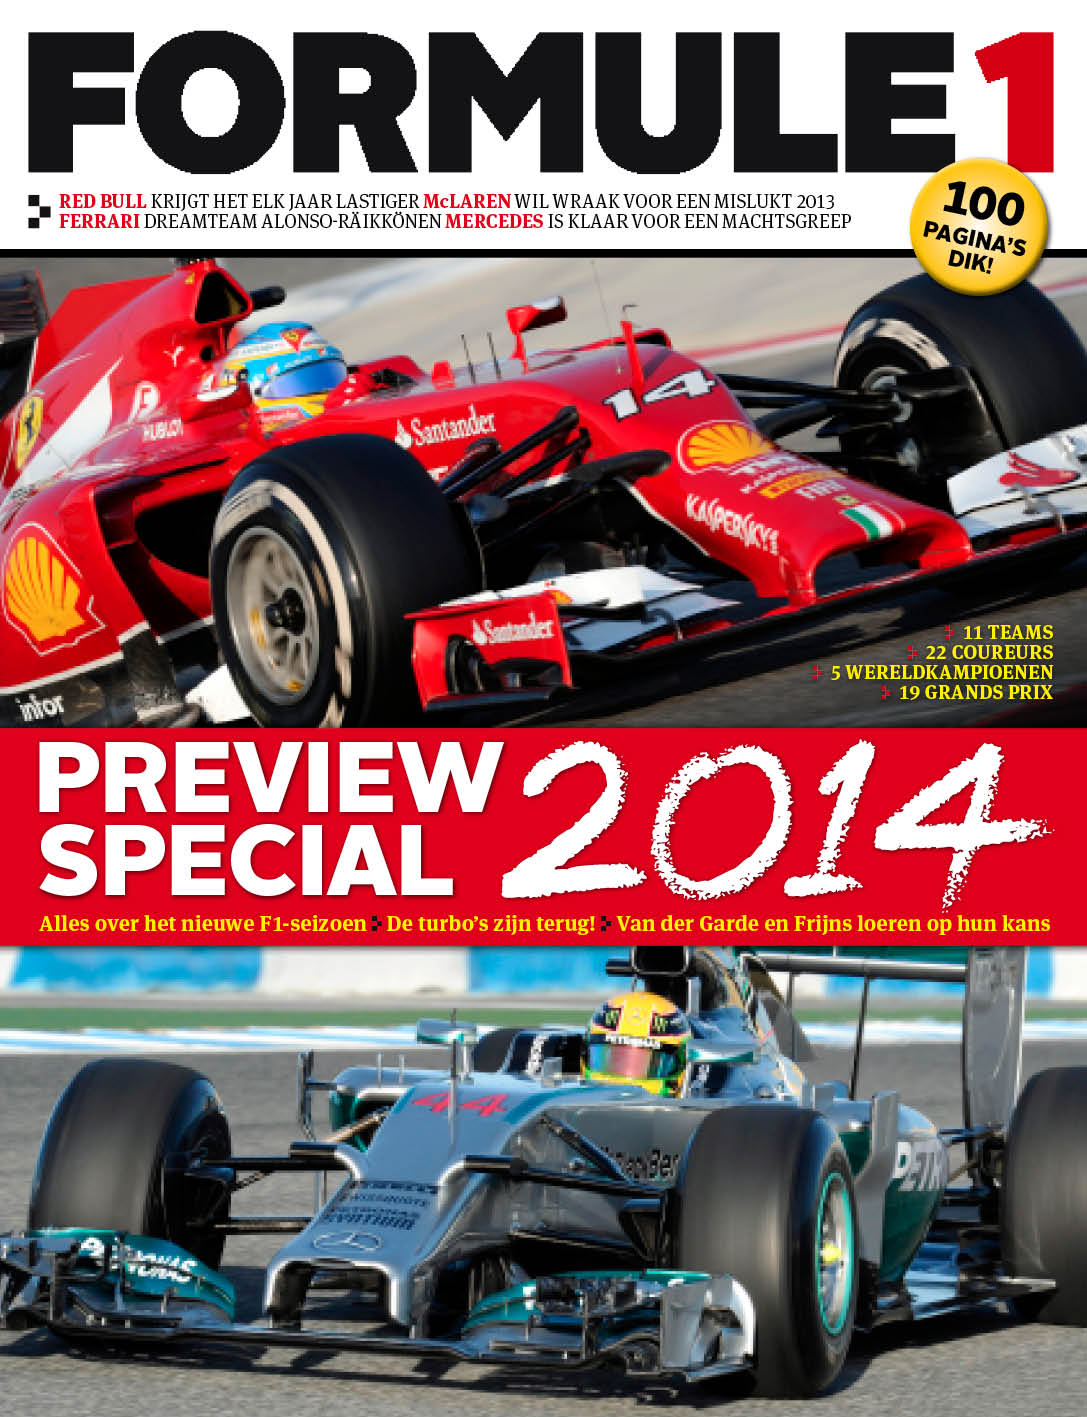 Preview Special 2014 is uit!